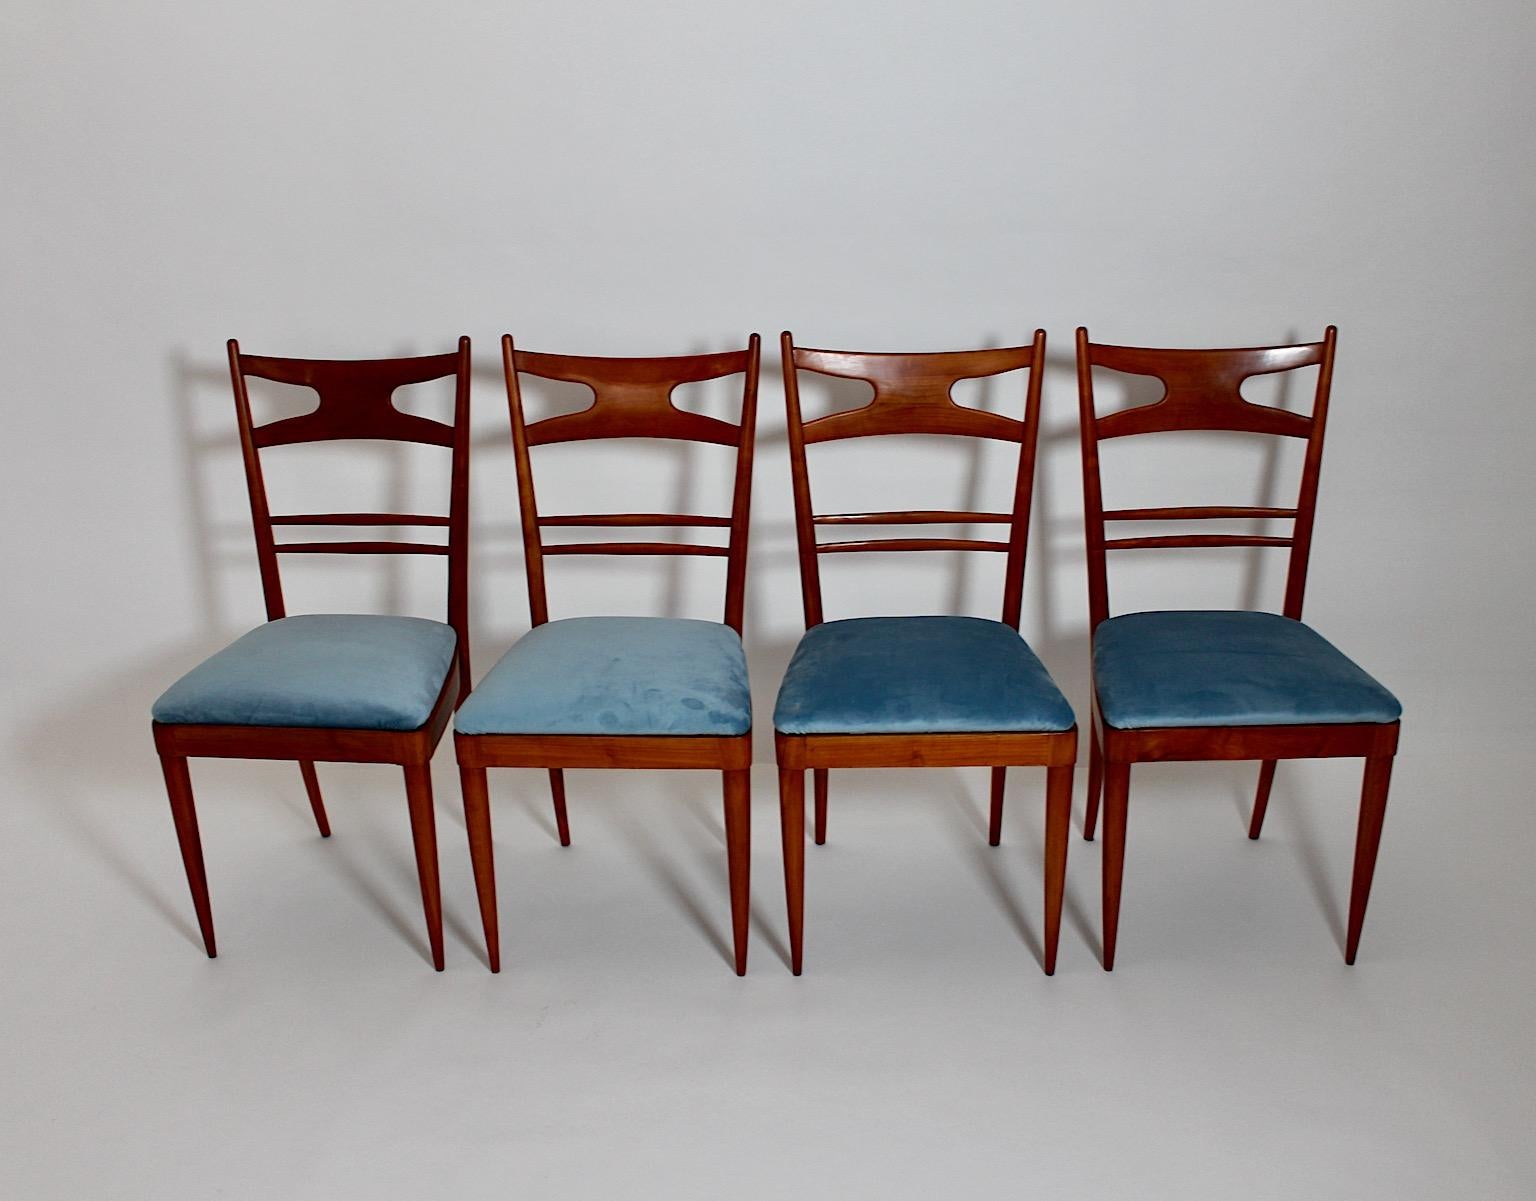 Mid-Century Modern vintage four (4) dining room chairs from cherry wood and seats covered with pastel blue velvet designed and manufactured 1950s Italy.
A wonderful set of four dining room chairs from cherry wood and blue velvet seats, while the